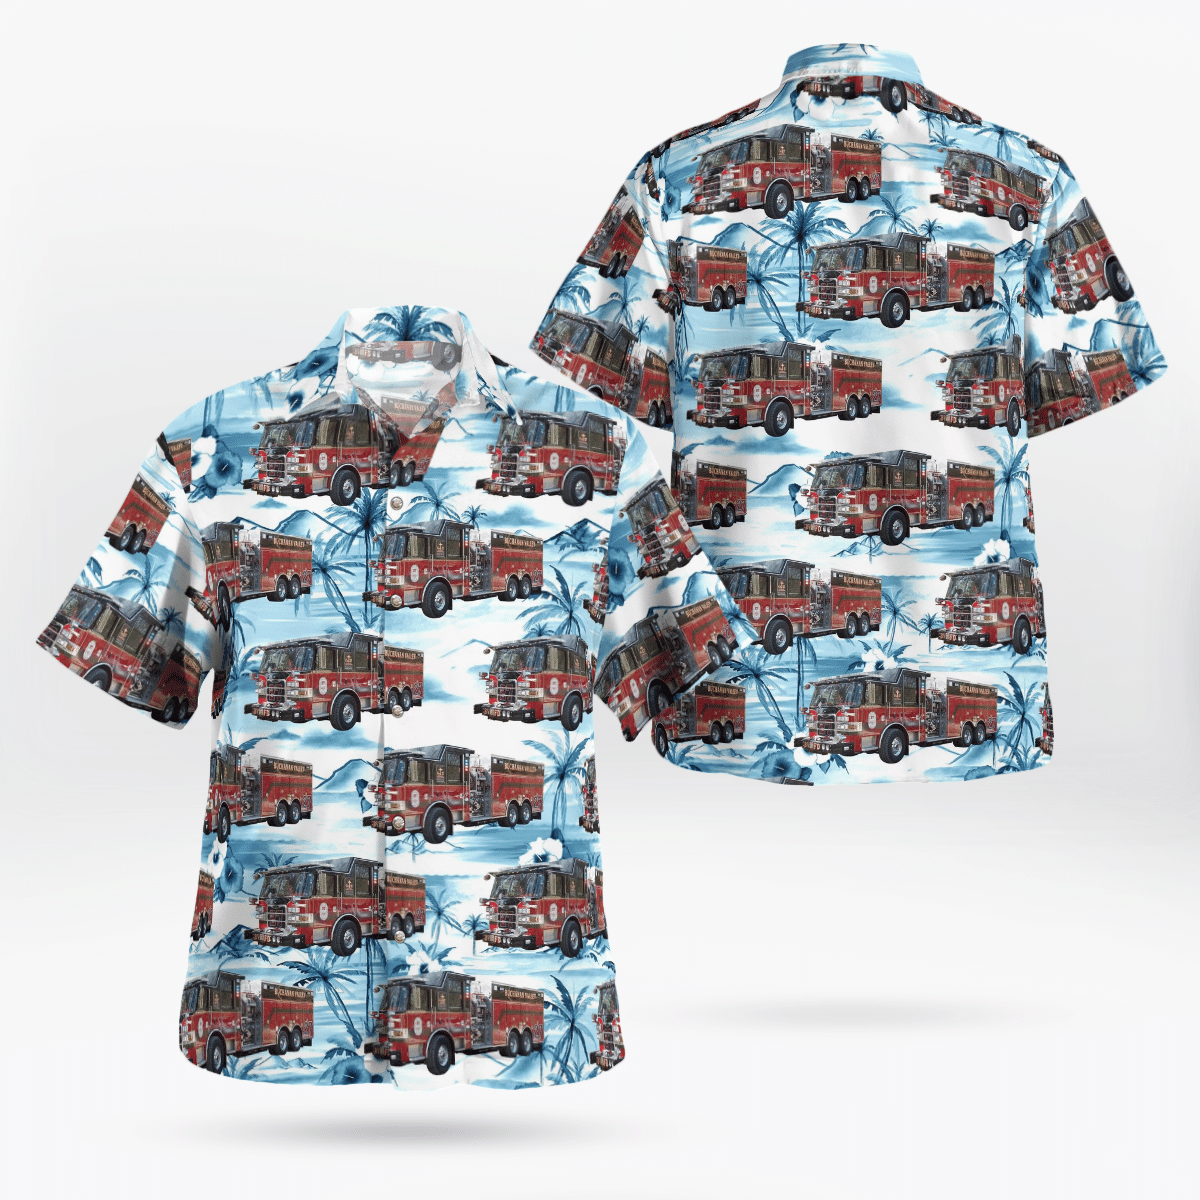 Shop now to find the perfect Hawaii Shirt for your hobby 70